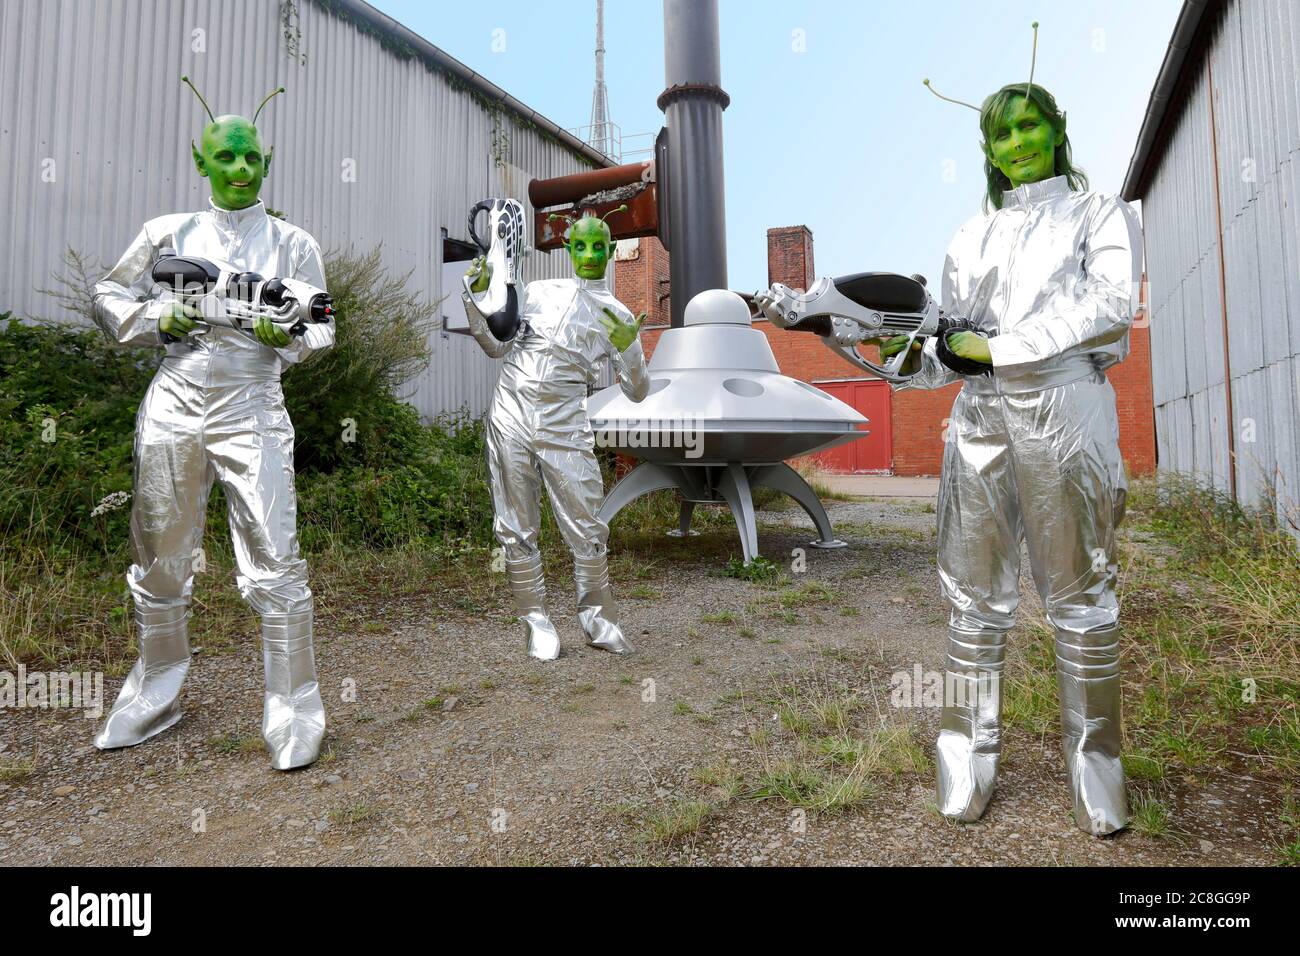 GEEK ART - Bodypainting and transfomaking: UFO photoshooting with Paul Skupin, Enrico Lein and Maria Skupin as extraterrestrials after landing on an industrial site on planet Earth in Bakede. - A project by photographer Tschiponnique Skupin and bodypainter Enrico Lein Stock Photo